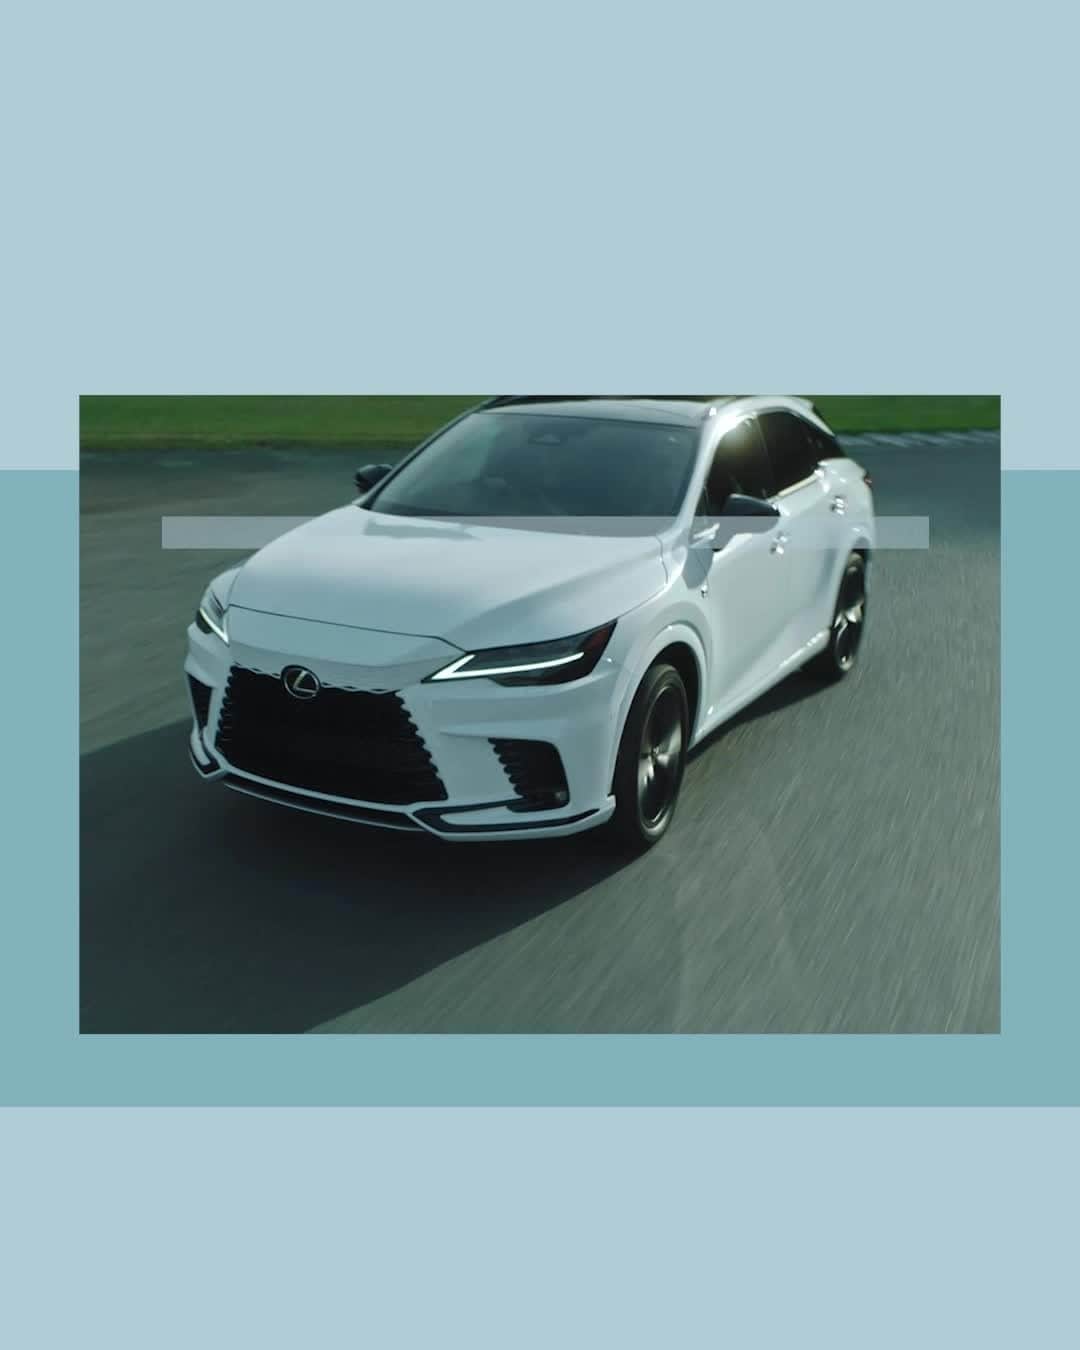 Lexus UKのインスタグラム：「Discover how the DIRECT4 all-wheel drive system gives Lexus drivers confidence behind the wheel. . . #Design #CarDesign #Automotive #Lexus #CarsofInstagram #Luxury」